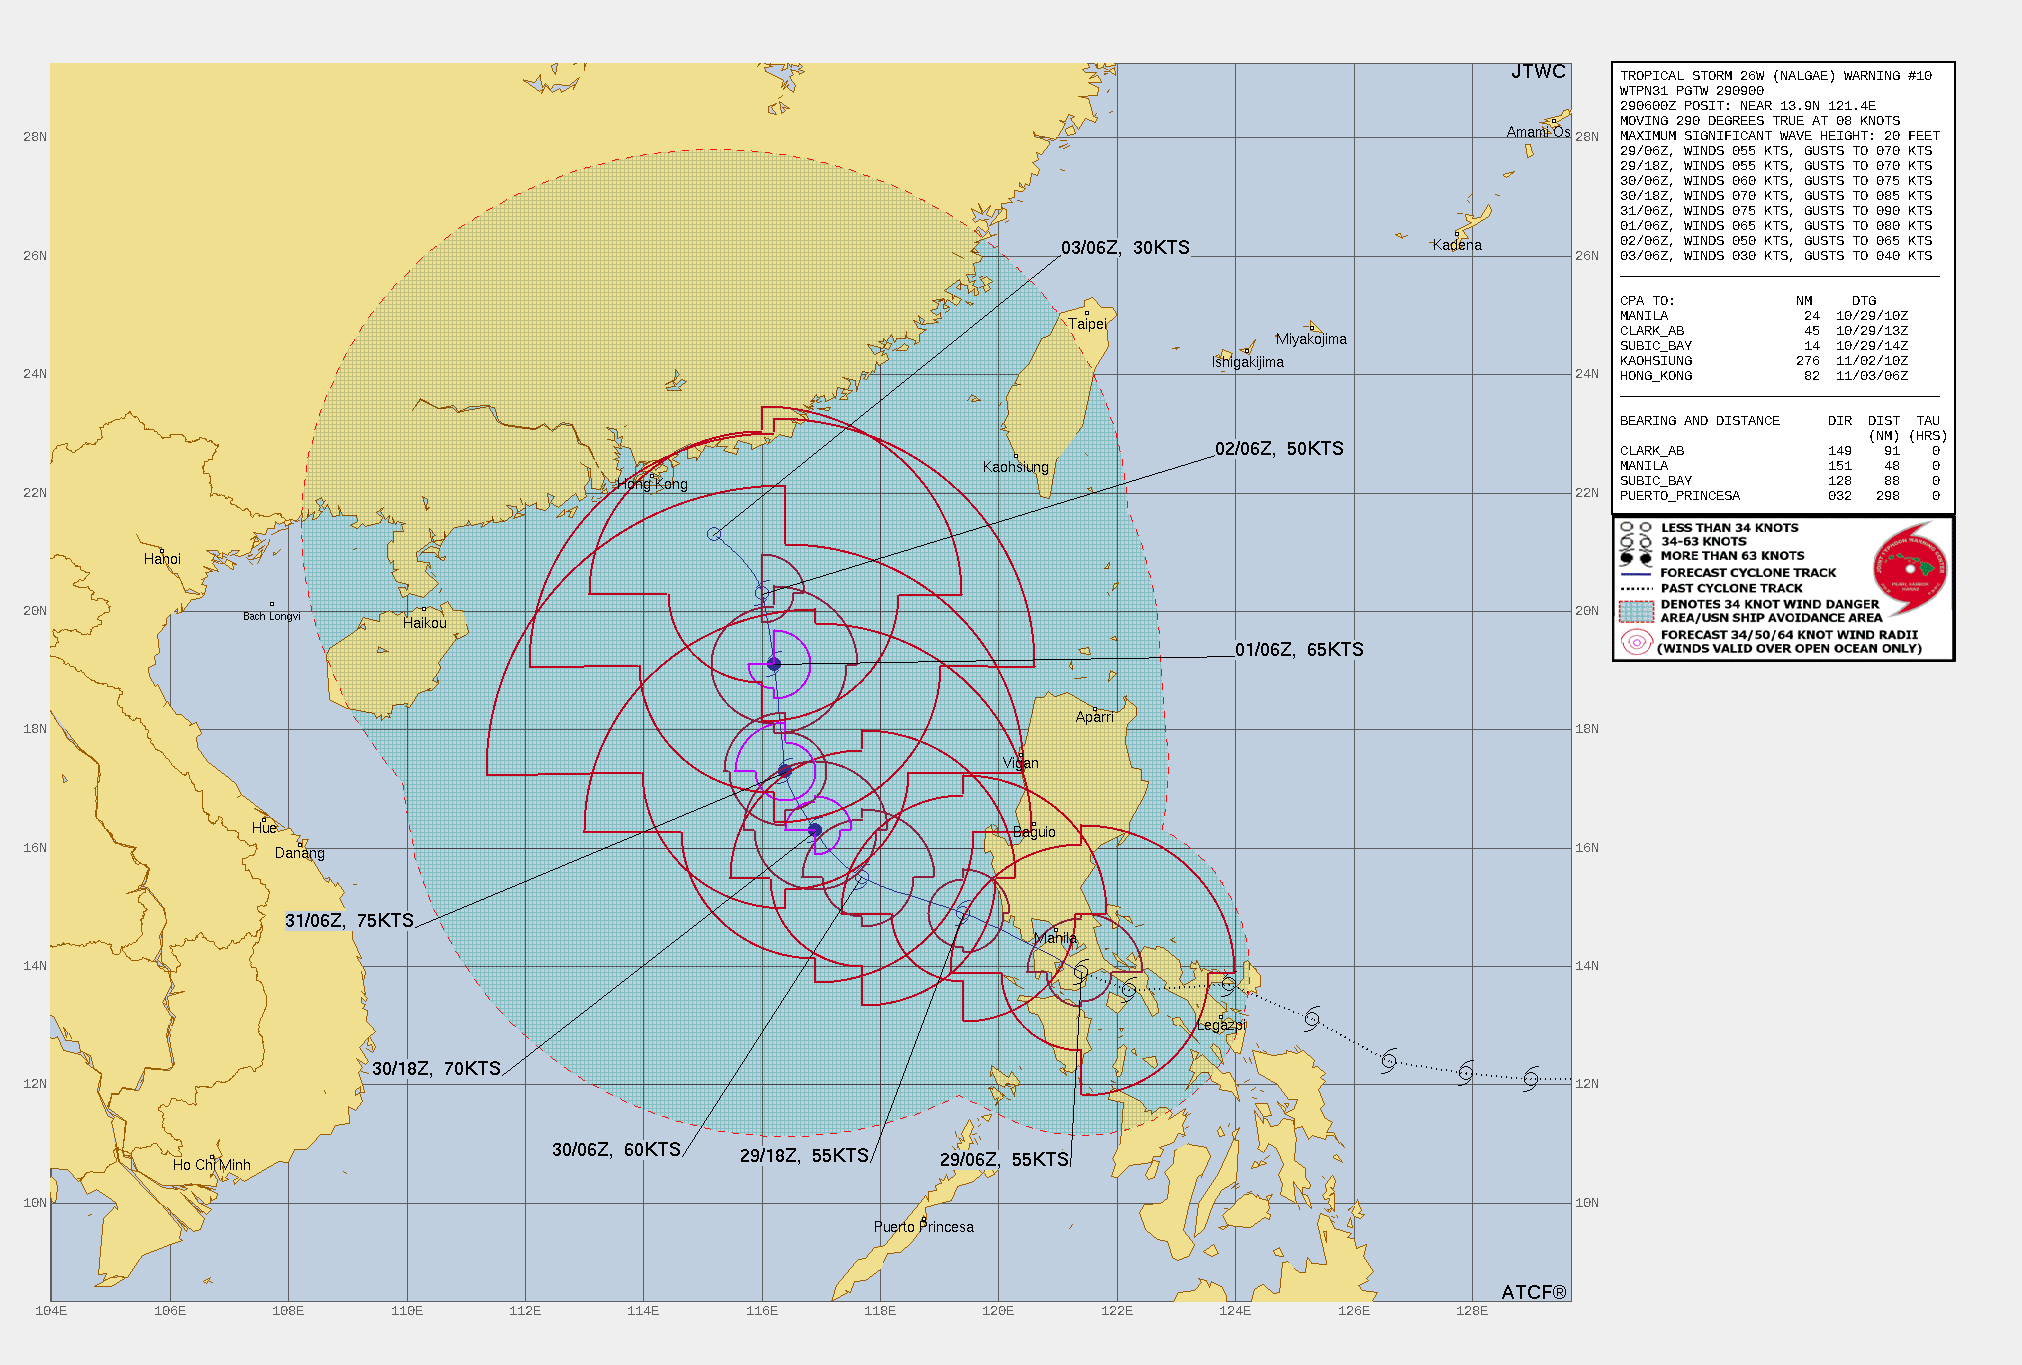 FORECAST REASONING.  SIGNIFICANT FORECAST CHANGES: THERE ARE NO SIGNIFICANT CHANGES TO THE FORECAST FROM THE PREVIOUS WARNING.  FORECAST DISCUSSION: TROPICAL STORM 26W HAS TRACKED WEST-NORTHWEST OVER THE PAST SIX HOUR ALONG THE SOUTHERN PERIPHERY OF A DEEP-LAYER SUBTROPICAL RIDGE (STR) POSITIONED TO THE NORTHEAST. THE SYSTEM WILL CONTINUE TO TRACK OVER THE CENTRAL PHILIPPINE ISLAND OF LUZON JUST SOUTH OF MANILA, AND REEMERGE INTO THE SOUTH CHINA SEA BY TAU 12. ALL GUIDANCE INDICATES A GENERAL WEST-NORTHWEST TRACK THROUGH TAU 36. HOWEVER, BY TAU 48, MODEL GUIDANCE INDICATES THE WESTERN SIDE OF THE STR WILL ERODE AND WEAKEN AHEAD OF AN APPROACHING MID-LATITUDE TROUGH, WHICH WILL ALLOW THE SYSTEM TO BEGIN TO TURN AND TRACK NORTHWARD. THE SYSTEM WILL CONTINUE NORTHWARD THROUGH TAU 96, BEFORE TURNING NORTHWESTWARD AS THE LOW-LEVEL WIND FLOW TAKES OVER AS THE MAIN STEERING FEATURE BY TAU 120. TS 26W IS FORECAST TO MAINTAIN INTENSITY OVER THE NEXT 12 HOURS, BEFORE STRENGTHENING UP TO 70 KNOTS BY TAU 36 AS THE SYSTEM EMERGES INTO THE SCS. BETWEEN TAU 36 AND TAU 48 AN UPPER-LEVEL POINT SOURCE ALOFT IS ANTICIPATED TO DEVELOP ALONG WITH WARM SSTS, WHICH WILL ENABLE A PERIOD OF INTENSIFICATION UP TO 75 KNOTS, POSSIBLY HIGHER. HOWEVER, COOLING SSTS, INCREASING VERTICAL WIND SHEAR, ALONG WITH DRY AIR ENTRAINMENT WILL LEAD TO STEADY WEAKENING TO TROPICAL DEPRESSION STRENGTH BETWEEN TAU 96 AND TAU 120.